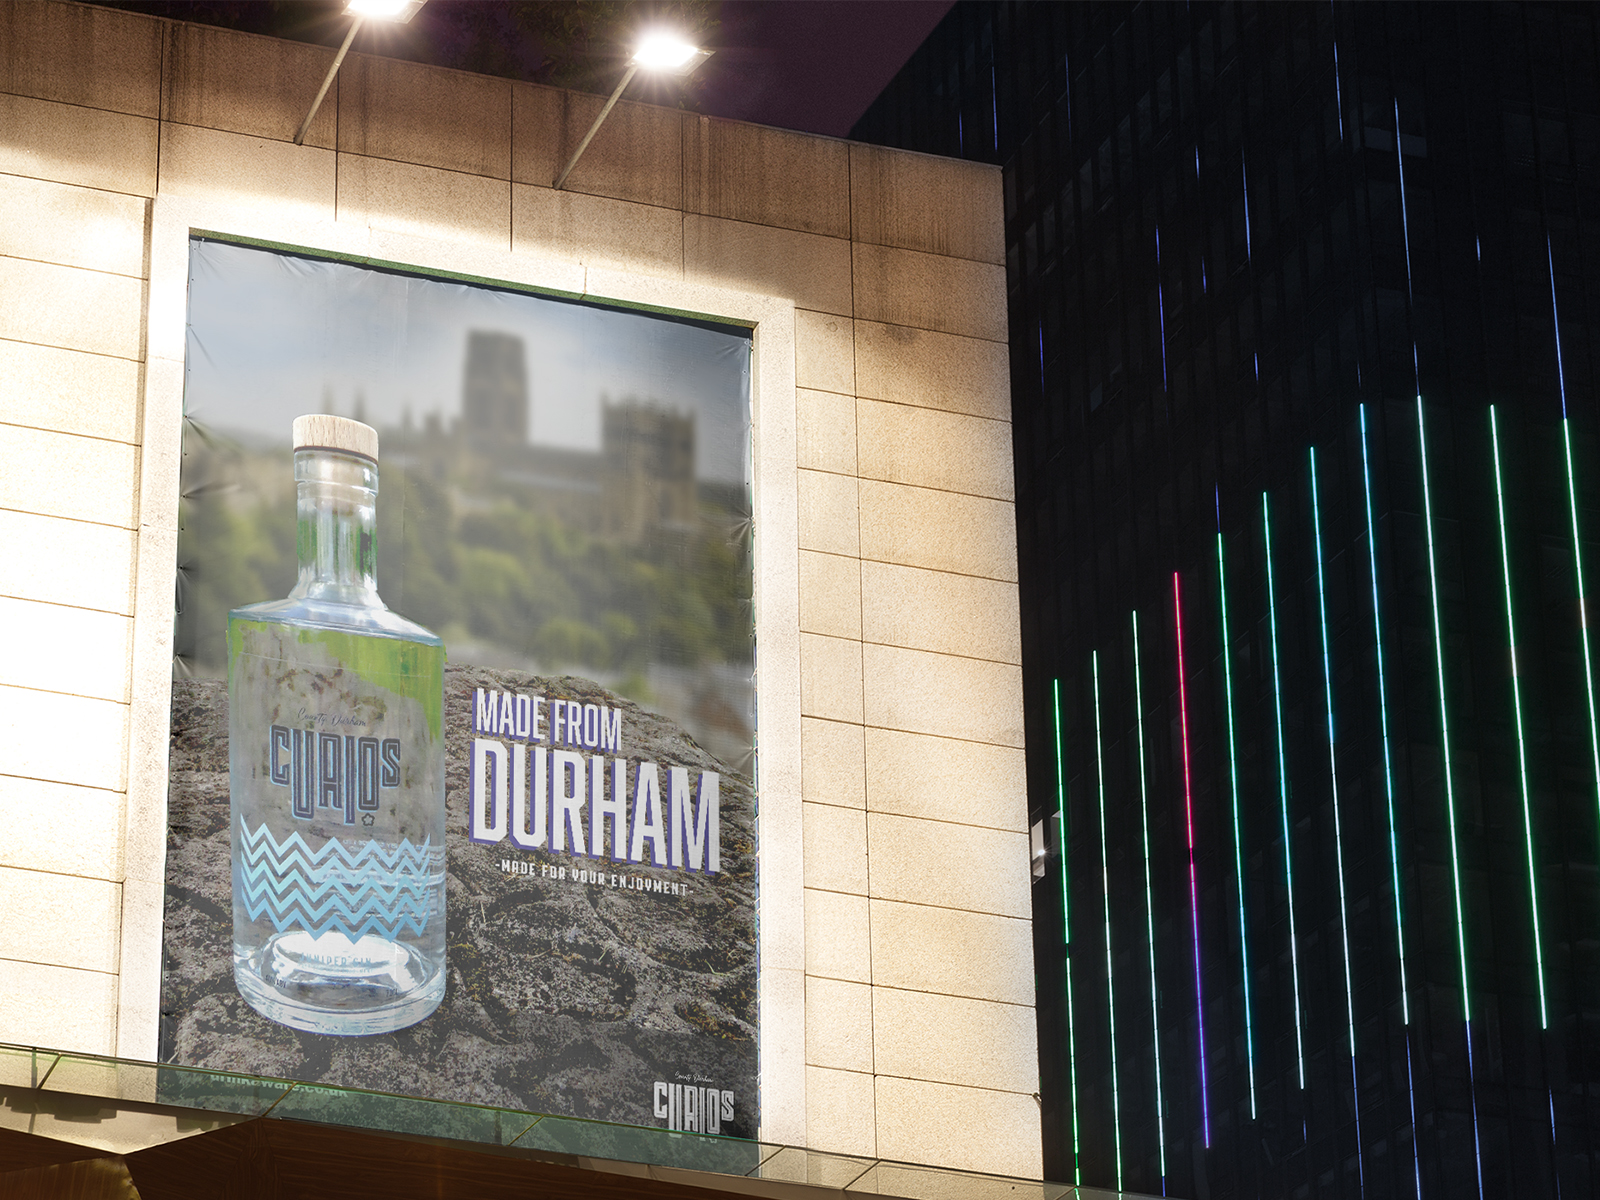 Poster for Gin brand 